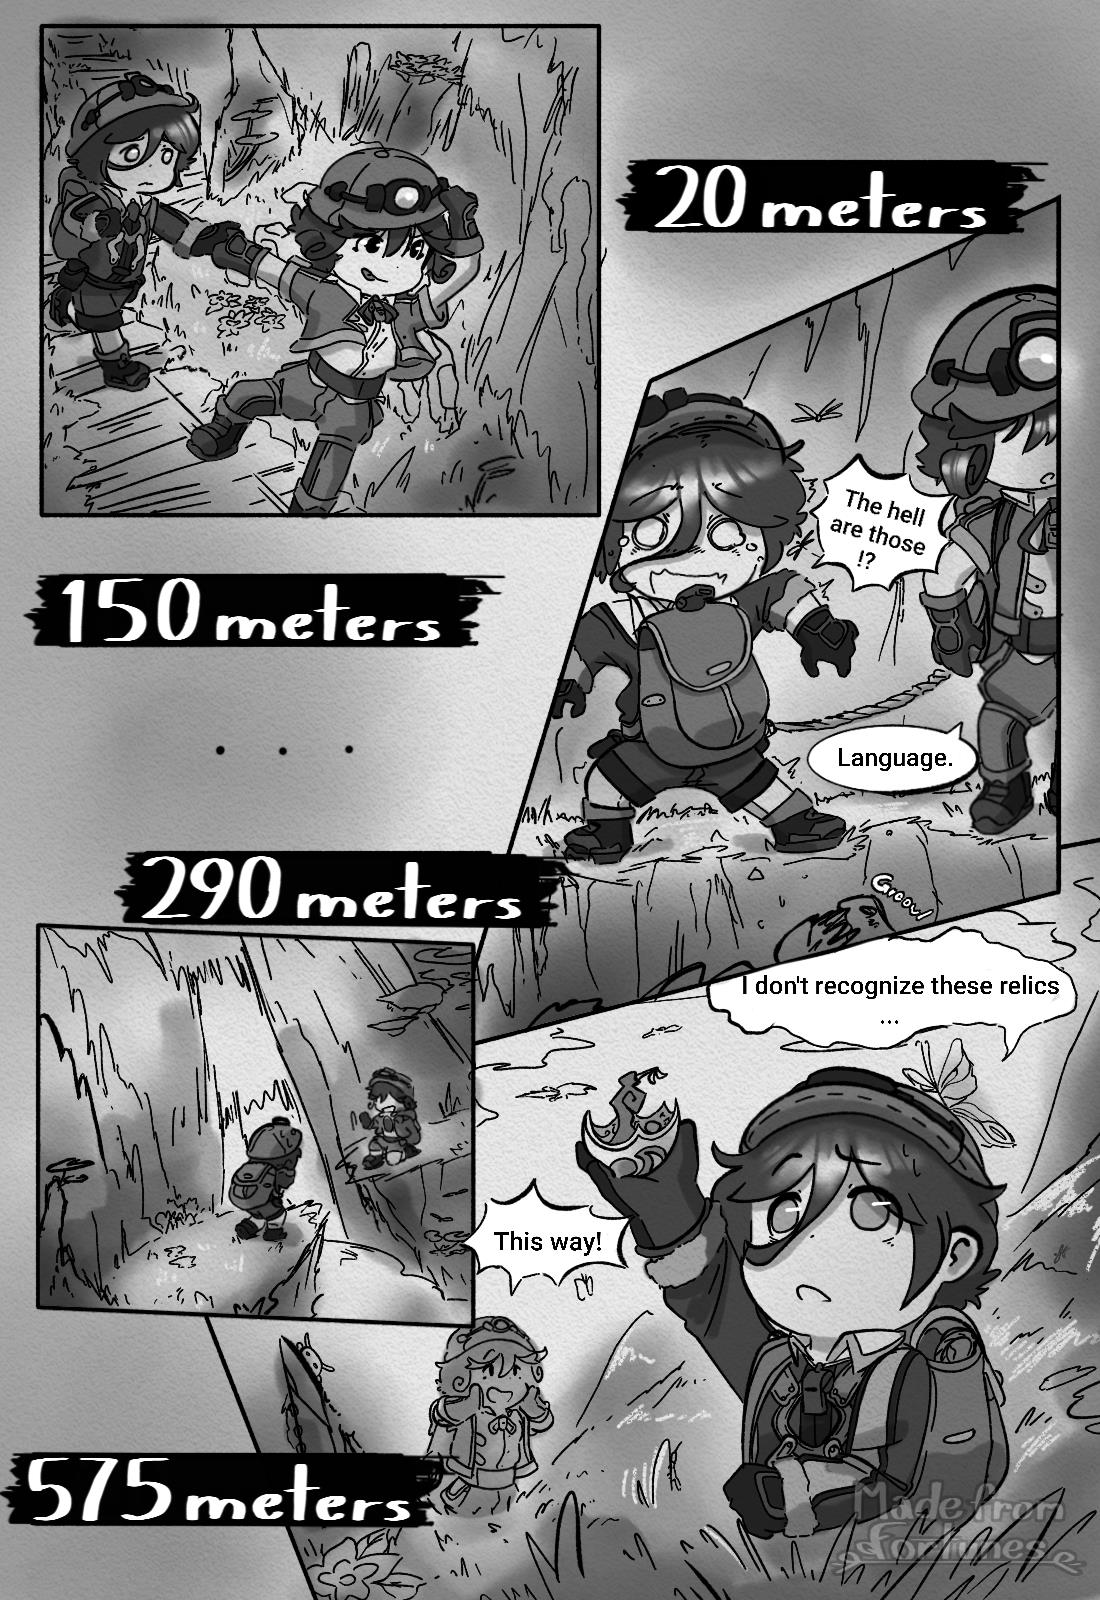 Made From Fortunes (Made In Abyss Fanmade Comic) Vol.1 Chapter 2: Blue Whistle - Picture 3